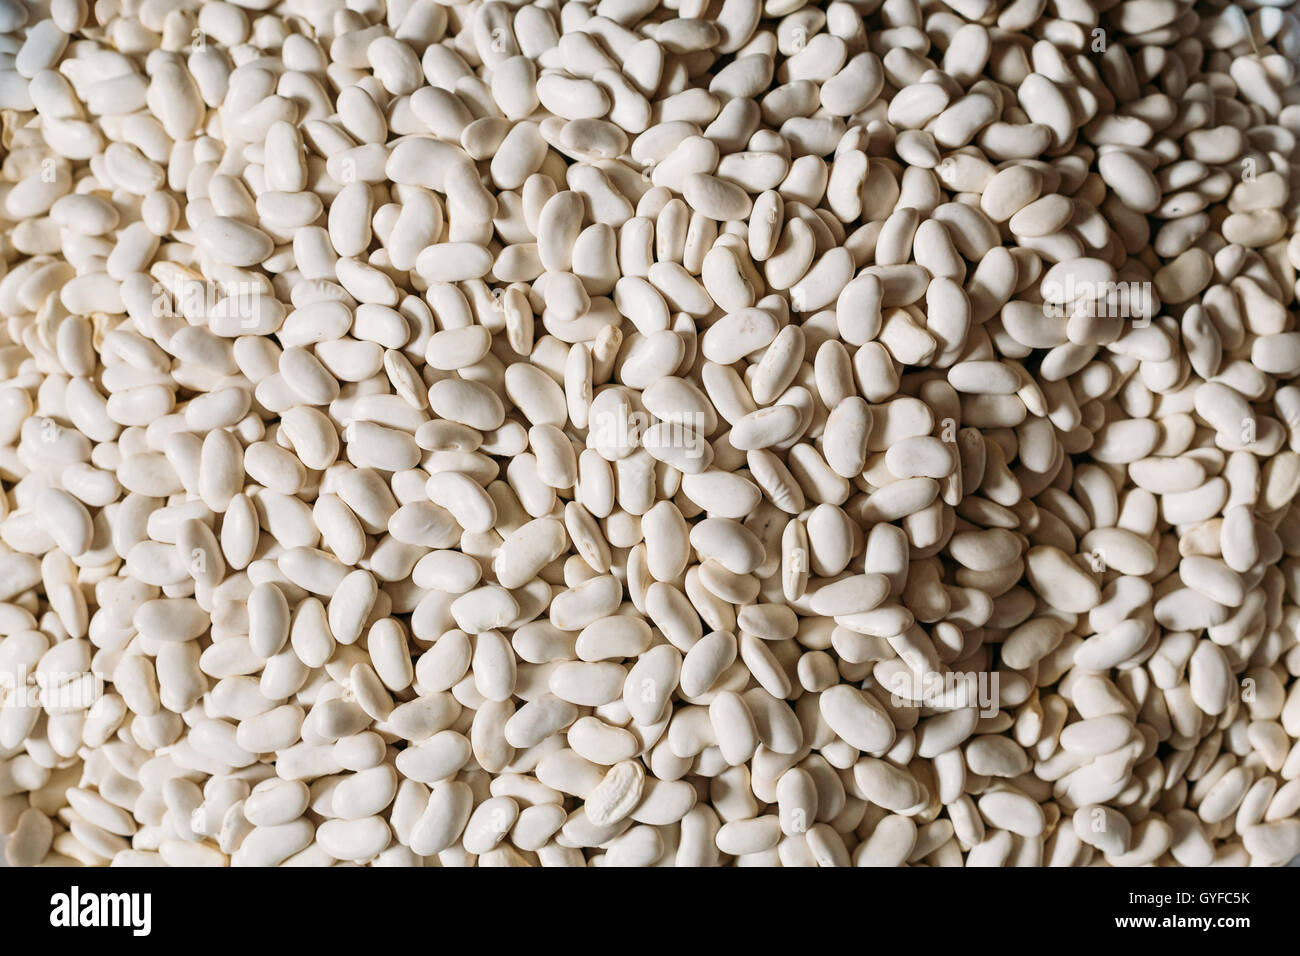 Close View Of The Heap Of Raw White Clean Dry Beans Or Haricot Beans, Navy Beans, Smooth, Plump, Kidney-Shaped For Sale At Marke Stock Photo